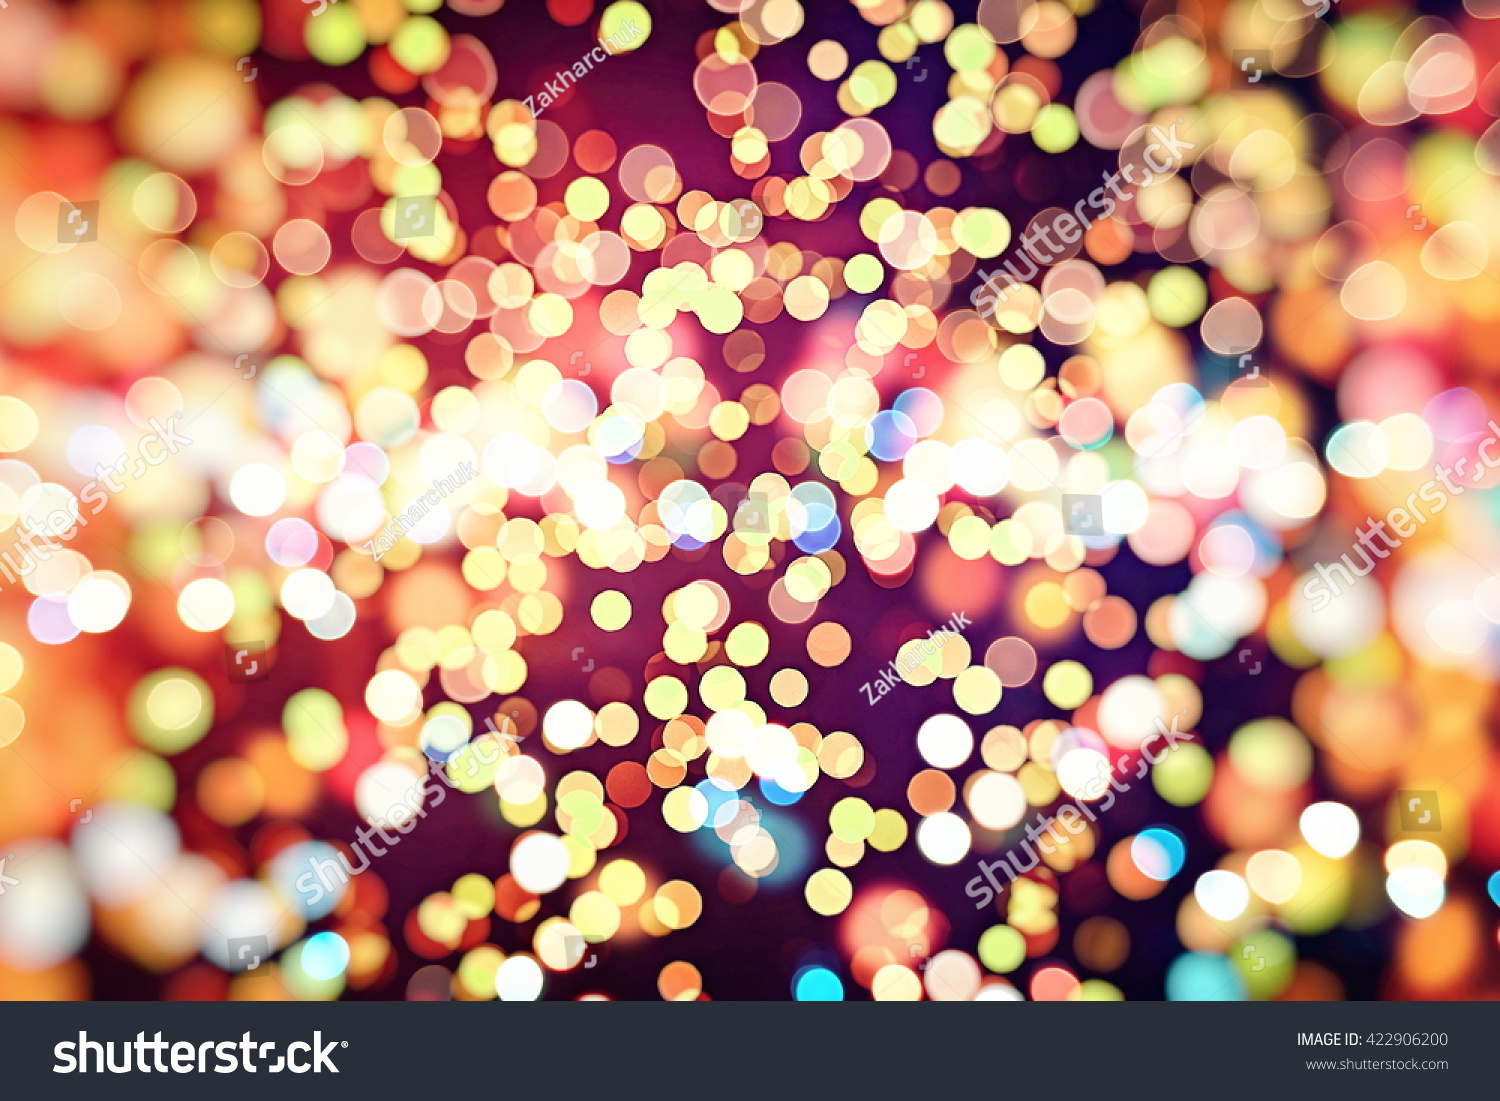 Abstract Twinkled Christmas Background Stock Photo 422906200 : Shutterstock